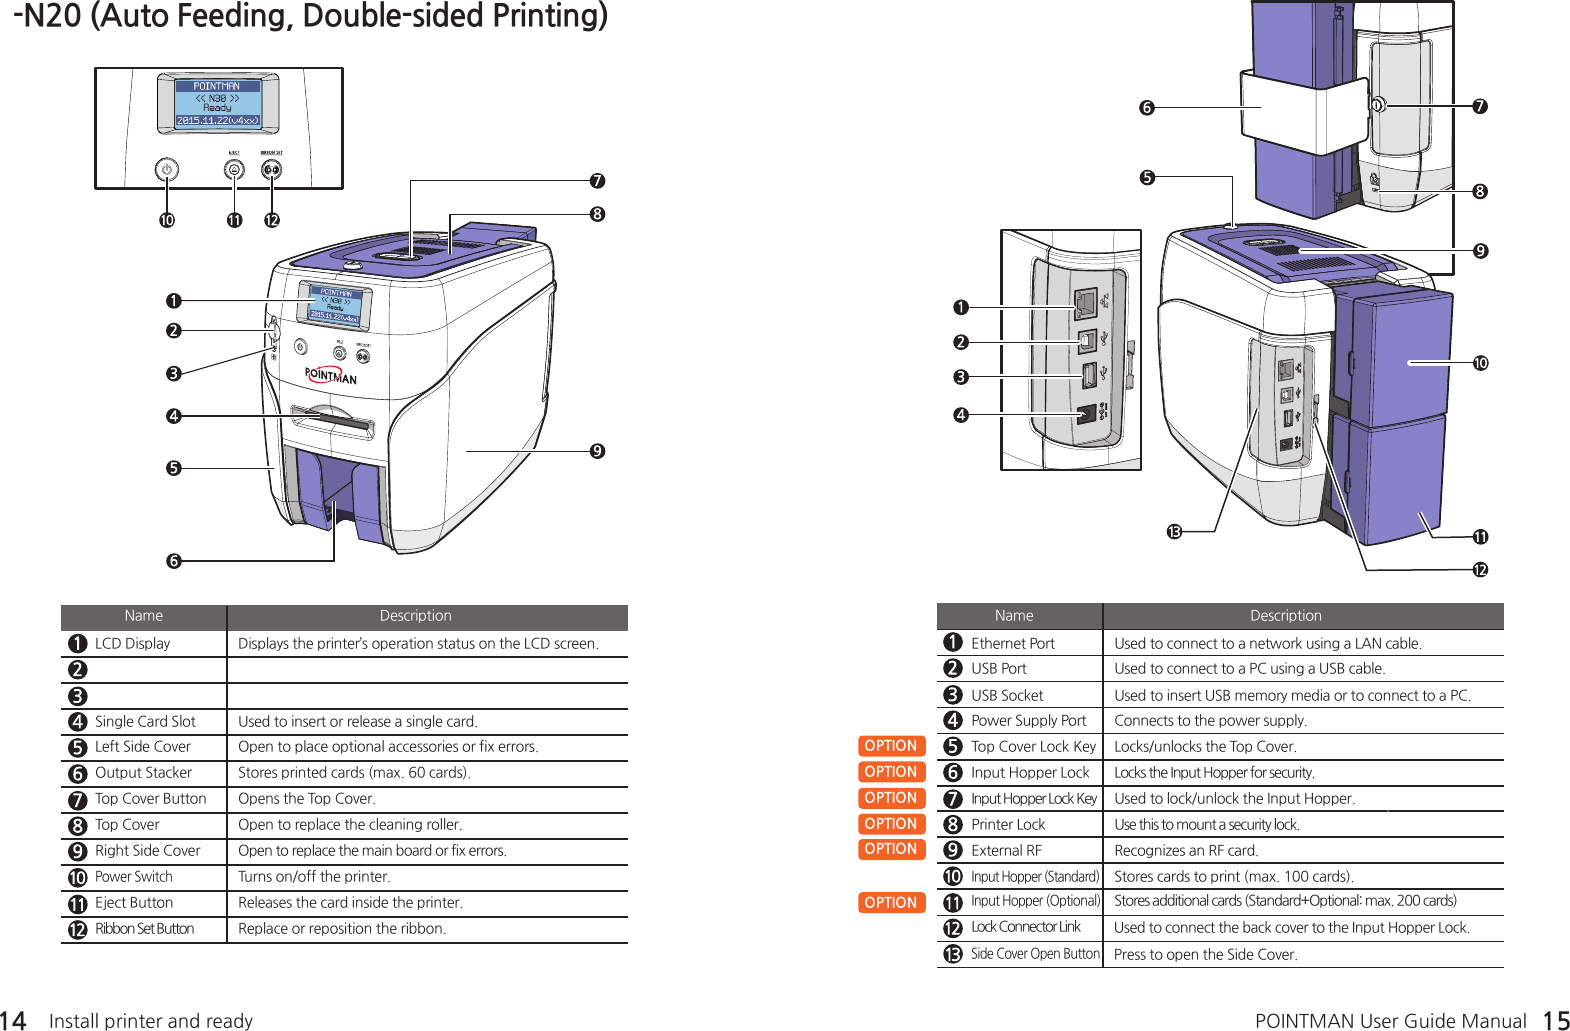 14 15-N20 (Auto Feeding, Double-sided Printing)Press to open the Side Cover.  Lock Connector Link Used to connect the back cover to the Input Hopper Lock.Input Hopper (Optional)Stores additional cards (Standard+Optional: max. 200 cards)OPTION OPTION OPTION OPTION OPTION OPTION LCD Display Displays the printer’s operation status on the LCD screen.Single Card Slot Used to insert or release a single card.Left Side Cover Open to place optional accessories or fix errors.Output Stacker Stores printed cards (max. 60 cards).Top Cover Button Opens the Top Cover.Top Cover Open to replace the cleaning roller.Right Side Cover Open to replace the main board or fix errors.Power SwitchTurns on/off the printer.Eject Button Releases the card inside the printer.Ribbon Set Button Replace or reposition the ribbon.Name DescriptionEthernet Port Used to connect to a network using a LAN cable.USB Port Used to connect to a PC using a USB cable.USB Socket Used to insert USB memory media or to connect to a PC.Power Supply Port Connects to the power supply.Name DescriptionTop Cover Lock Key Locks/unlocks the Top Cover.  Printer Lock Use this to mount a security lock.Used to lock/unlock the Input Hopper.Input Hopper Lock Locks the Input Hopper for security. External RF Recognizes an RF card.Input Hopper (Standard)Stores cards to print (max. 100 cards).Install printer and ready POINTMAN User Guide ManualSide Cover Open ButtonInput Hopper Lock Key